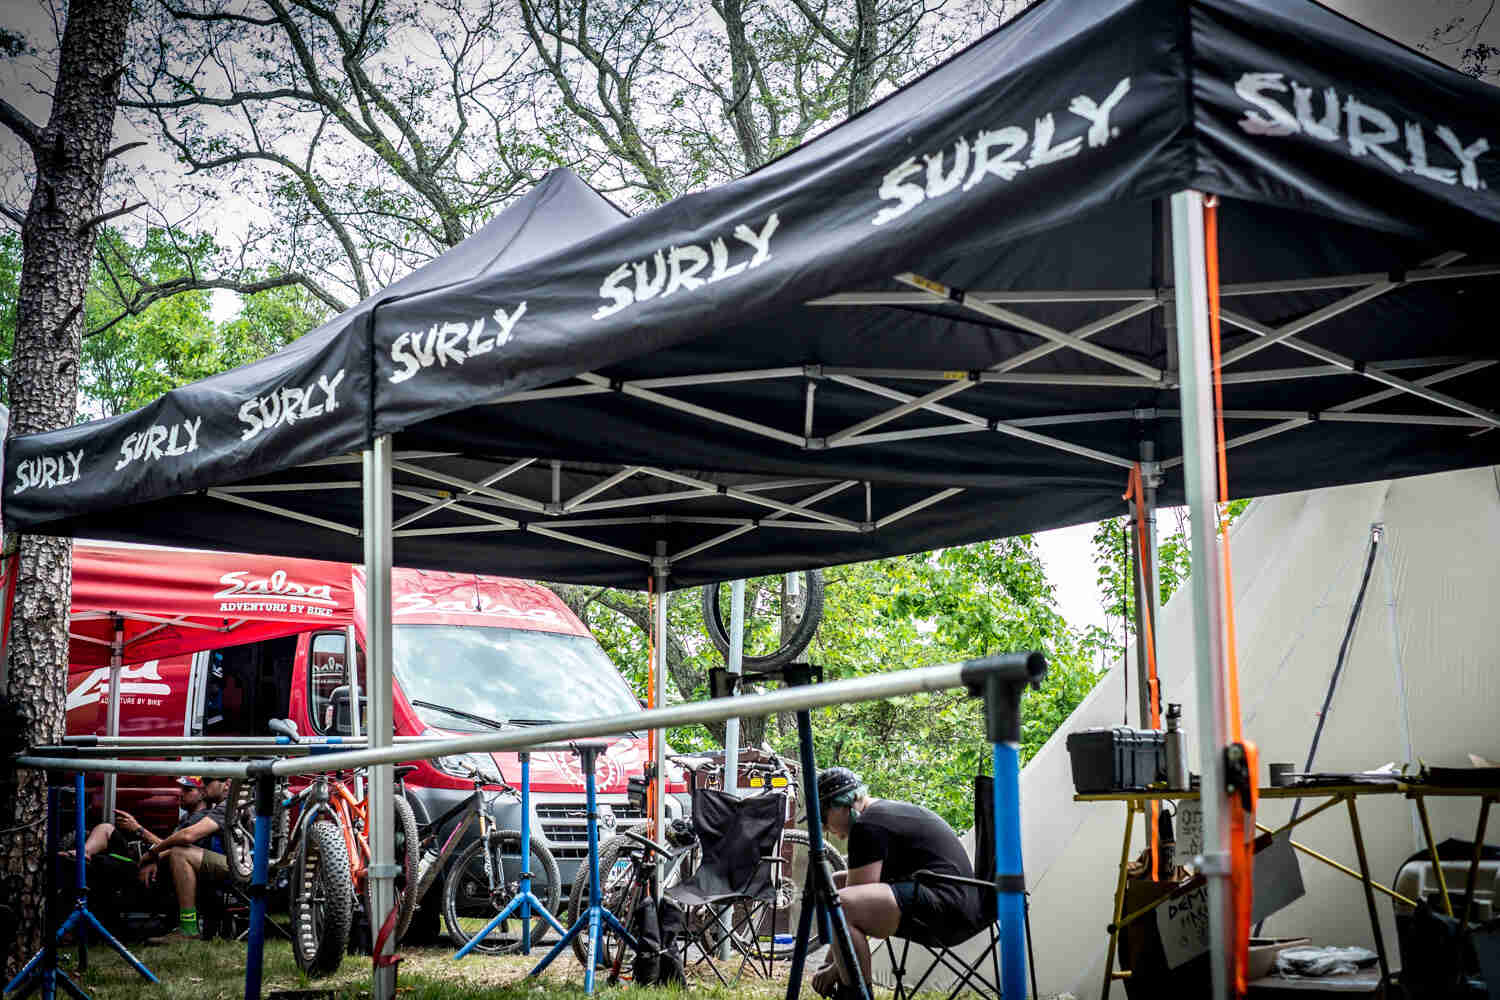 Cyclists and bikes, under a Surly bikes canopy in front of a red van, in the woods